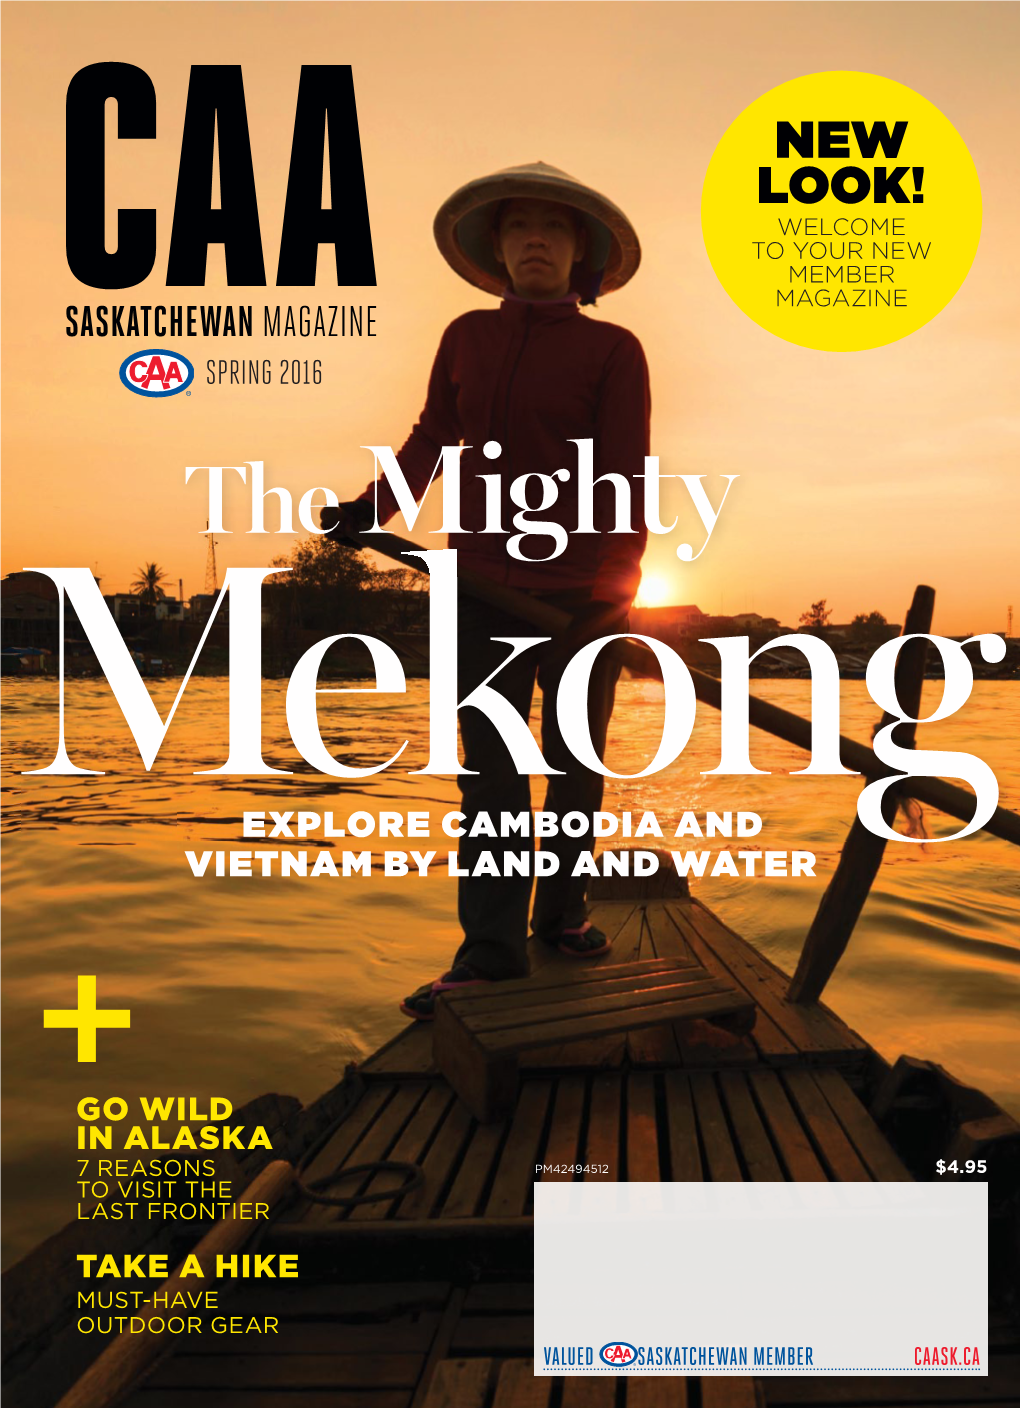 NEW LOOK! WELCOME to YOUR NEW MEMBER MAGAZINE SASKATCHEWAN MAGAZINE SPRING 2016 the Mighty Mekong EXPLORE CAMBODIA and VIETNAM by LAND and WATER